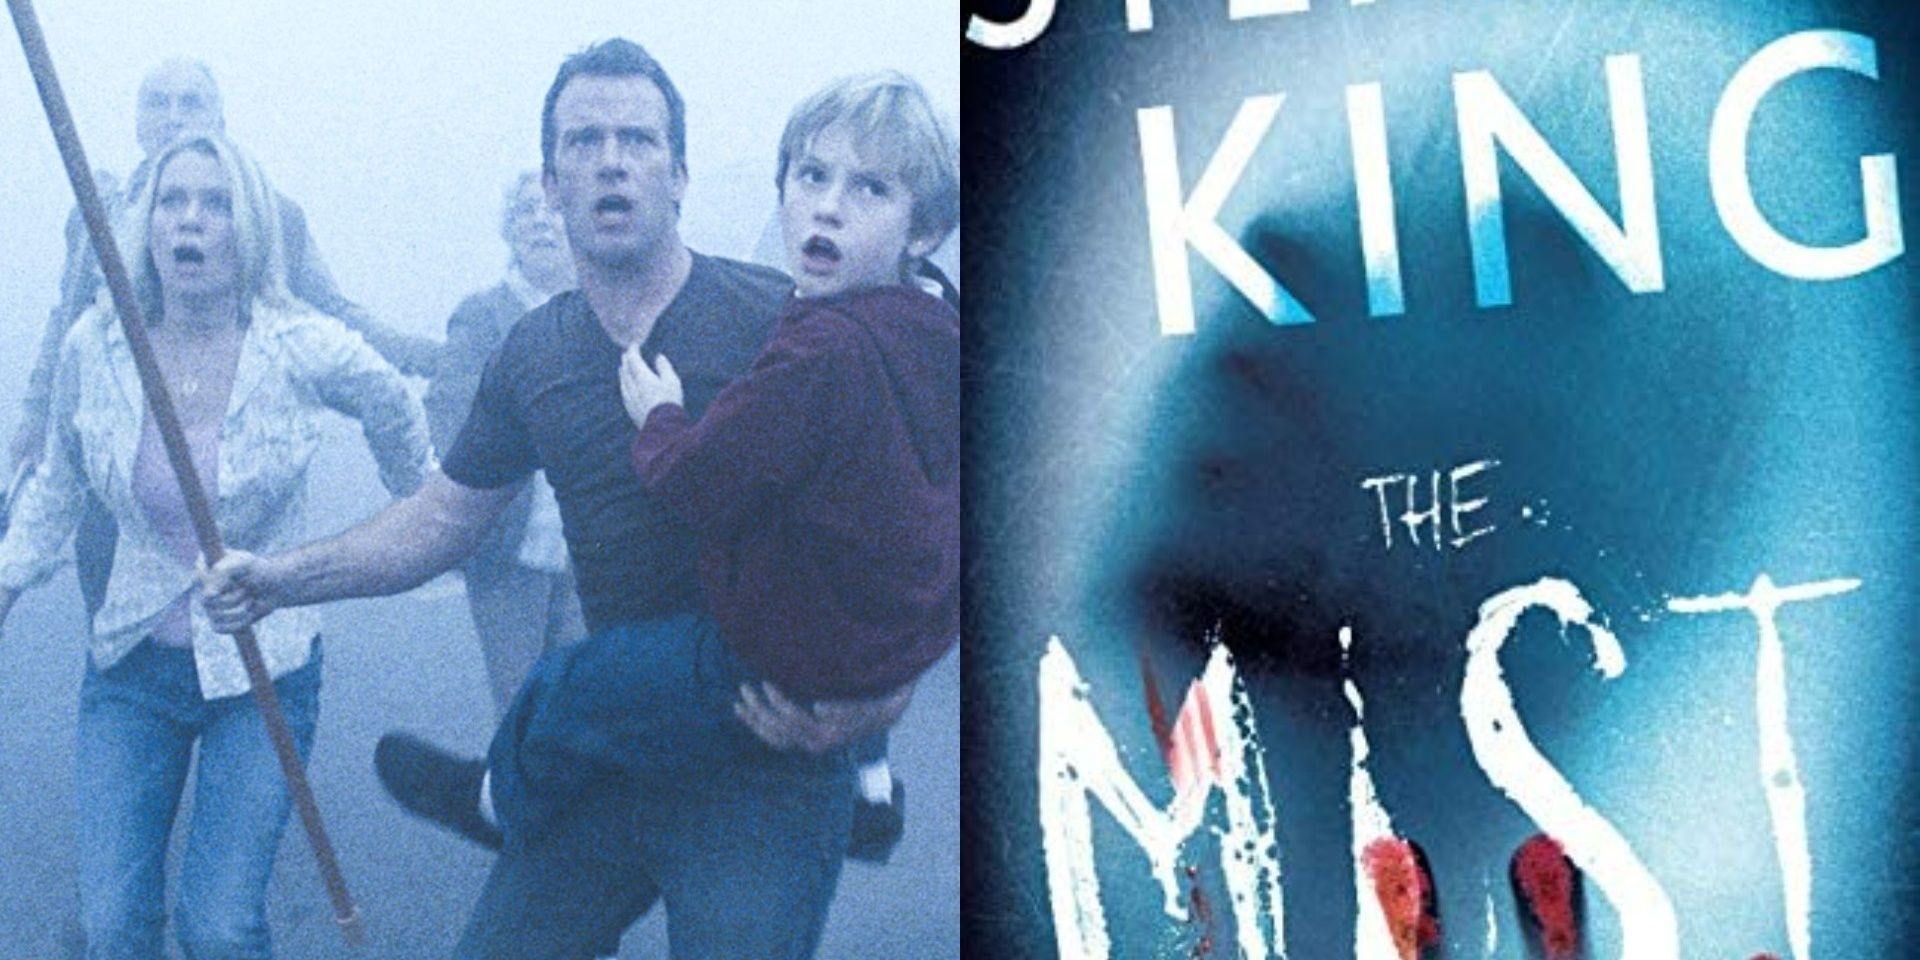 (Left) Picture of group of survivors with weapons, horrified / (Right) The Mist cover with bloody handprint